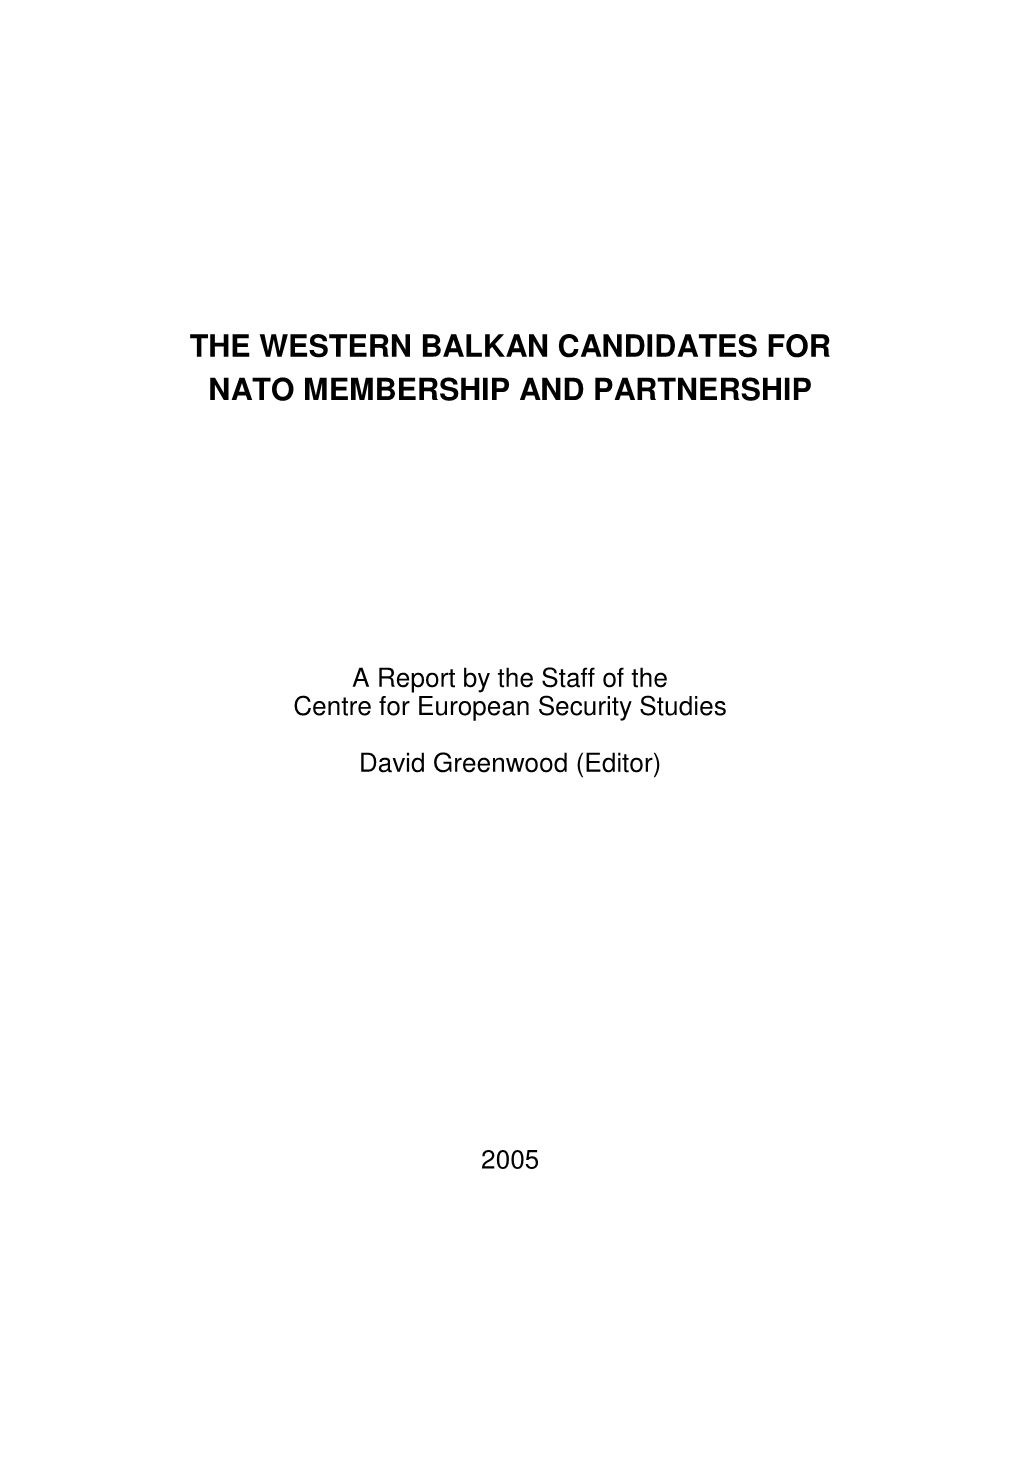 The Western Balkan Candidates for Nato Membership and Partnership